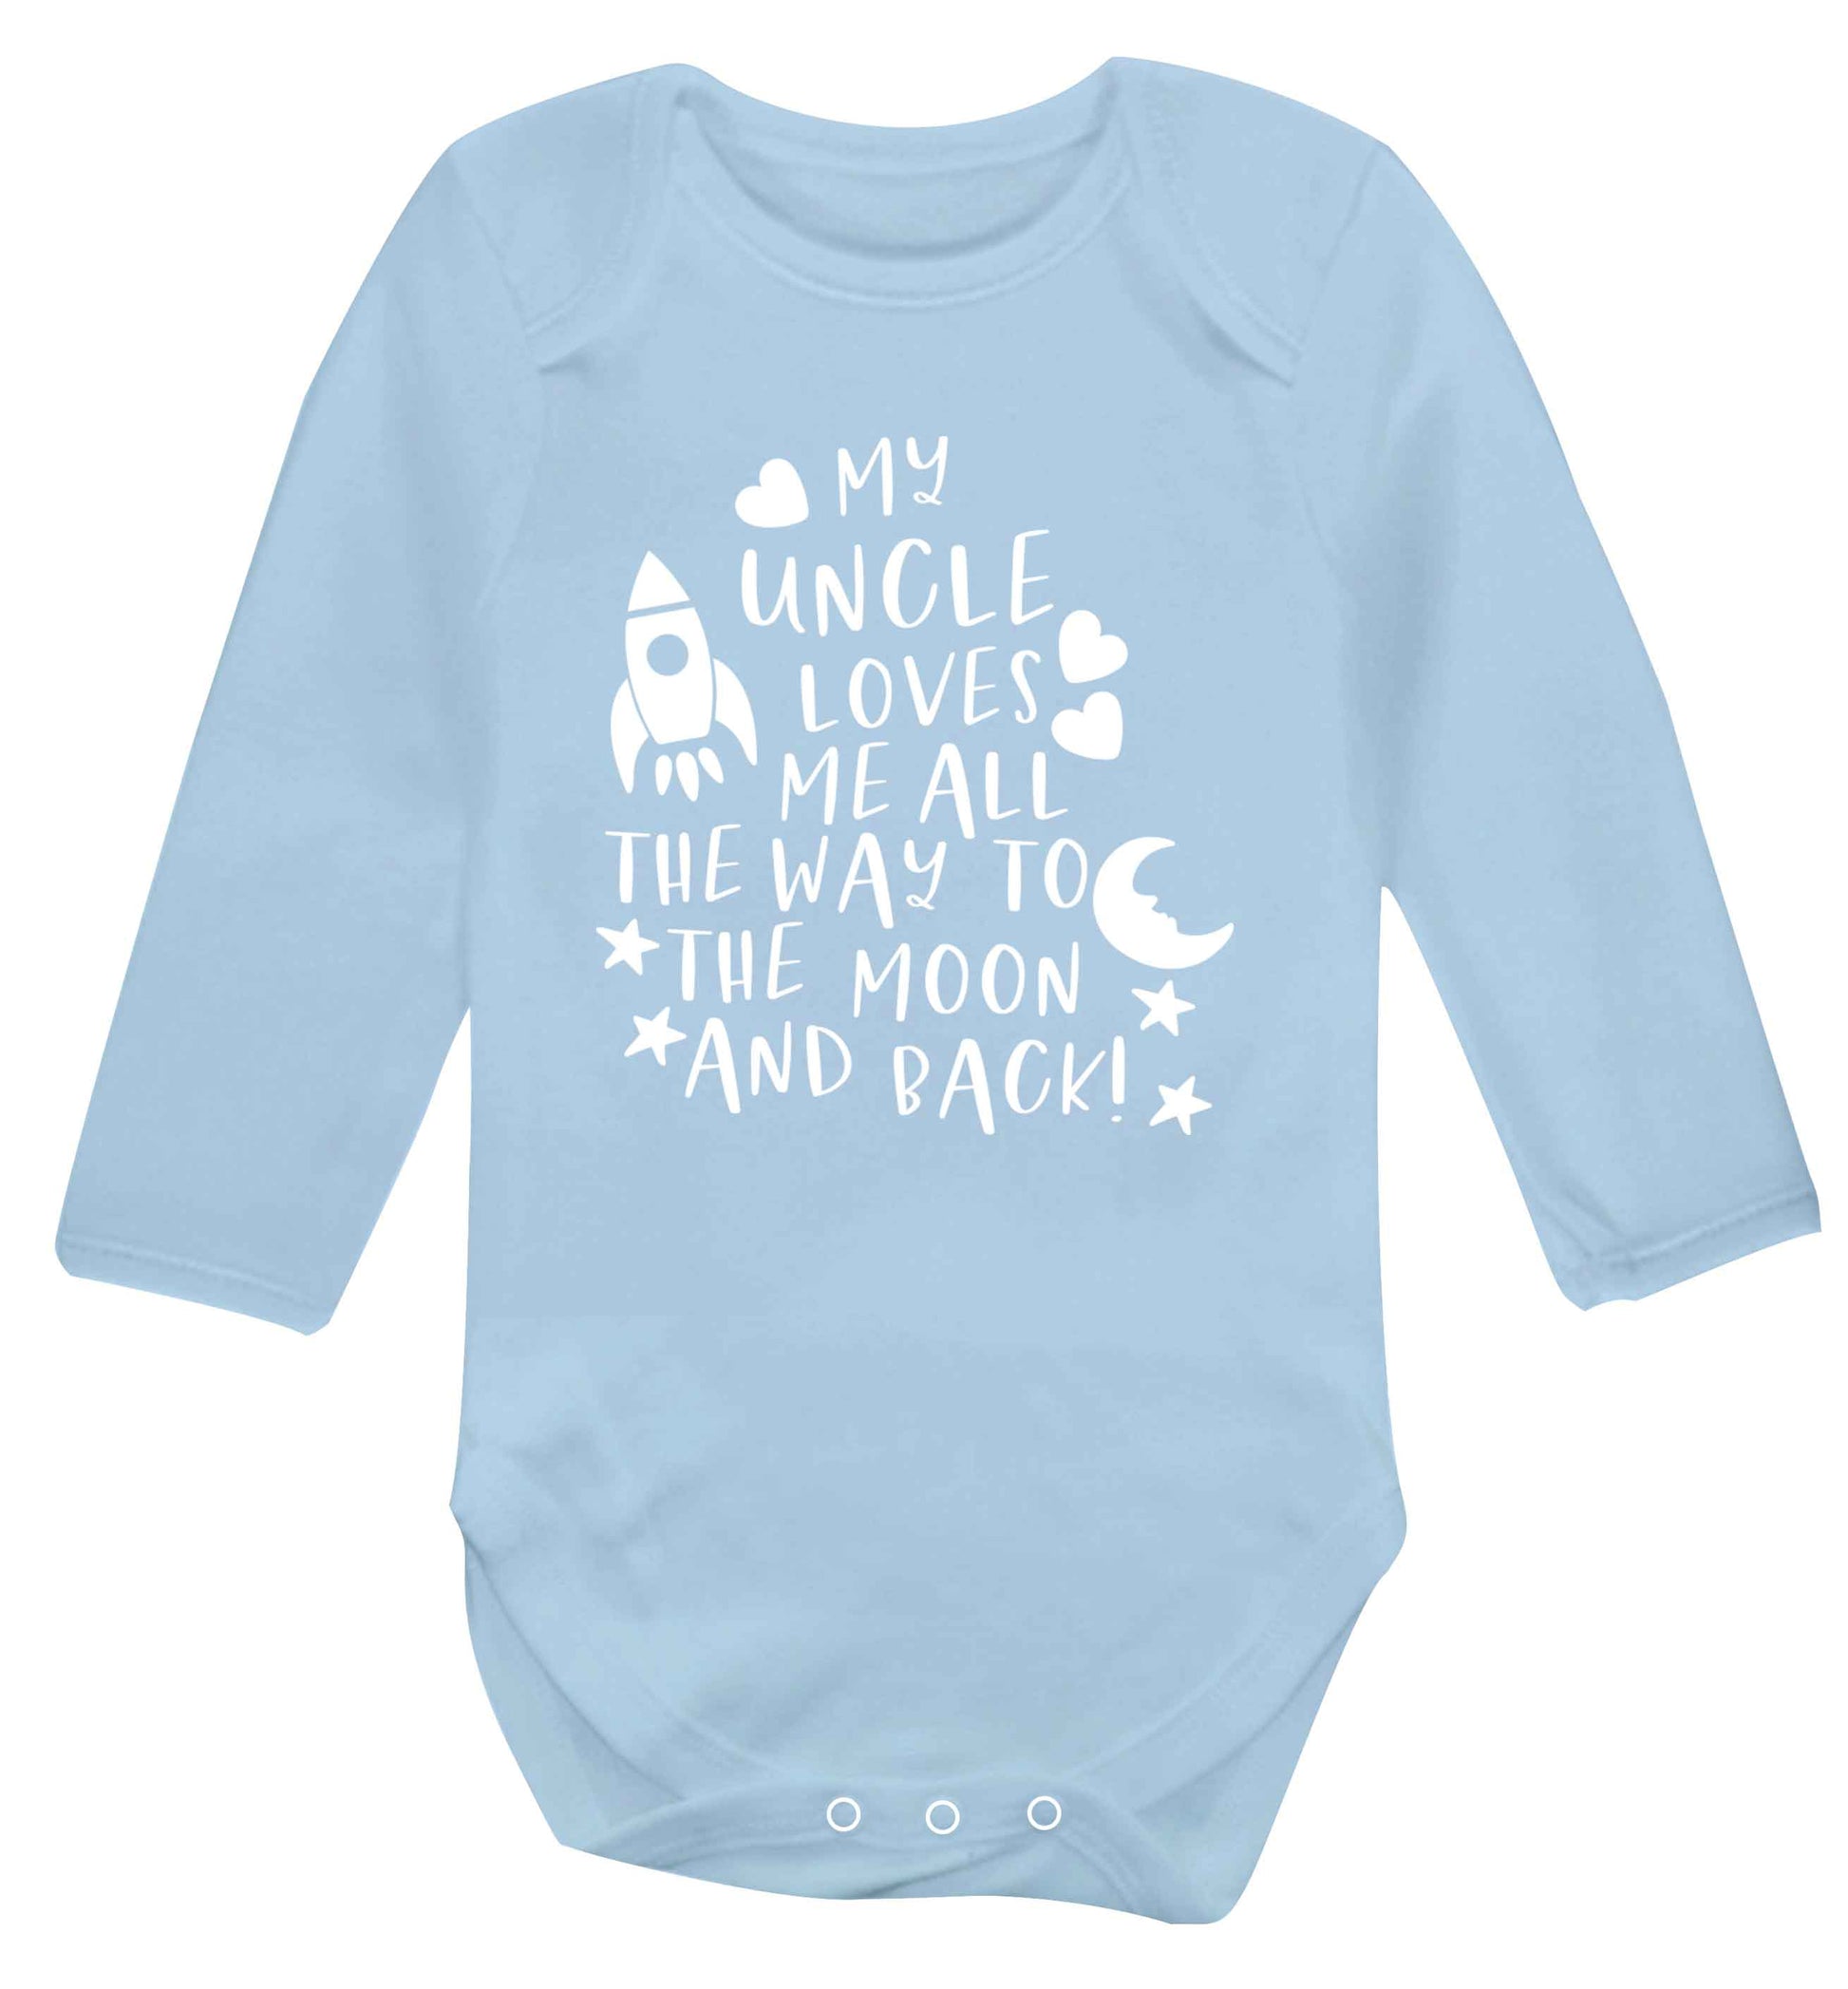 My uncle loves me all the way to the moon and back Baby Vest long sleeved pale blue 6-12 months